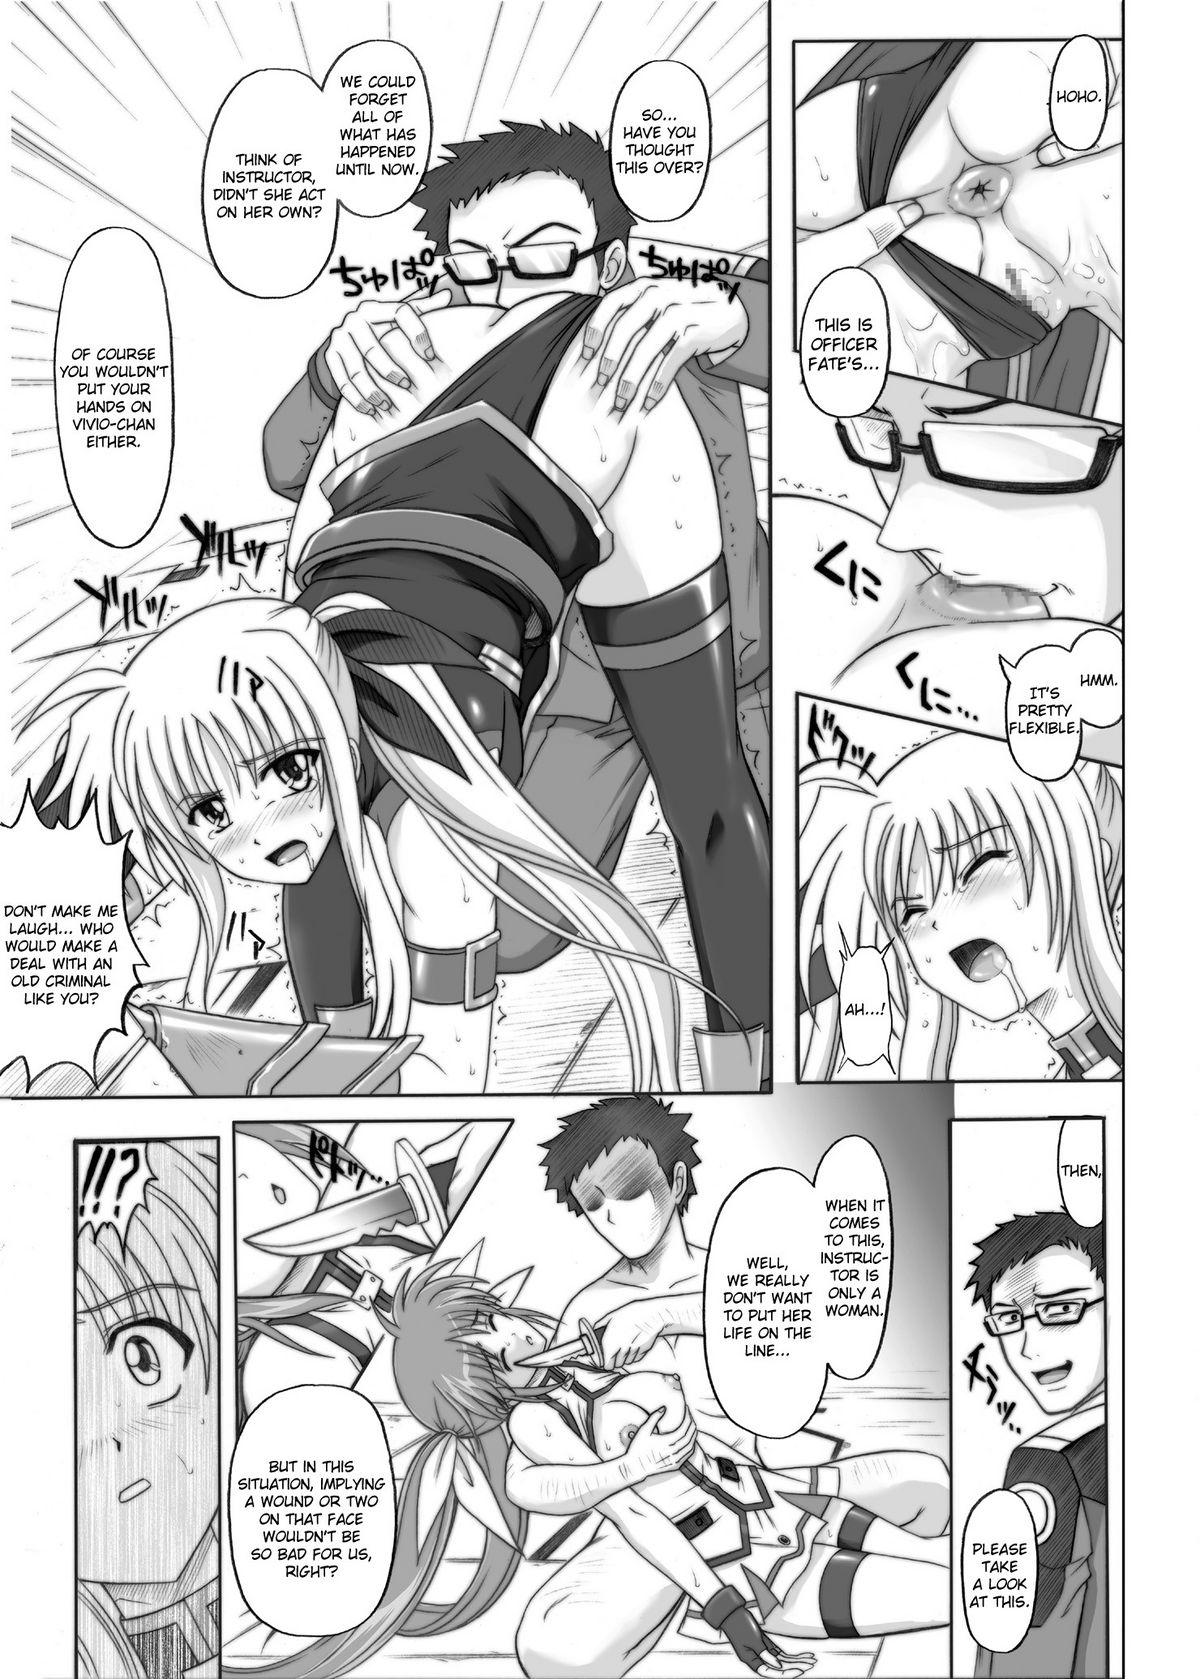 Mature Woman 840 BAD END - Color Classic Situation Note Extention 1.5 - Mahou shoujo lyrical nanoha Cbt - Page 6